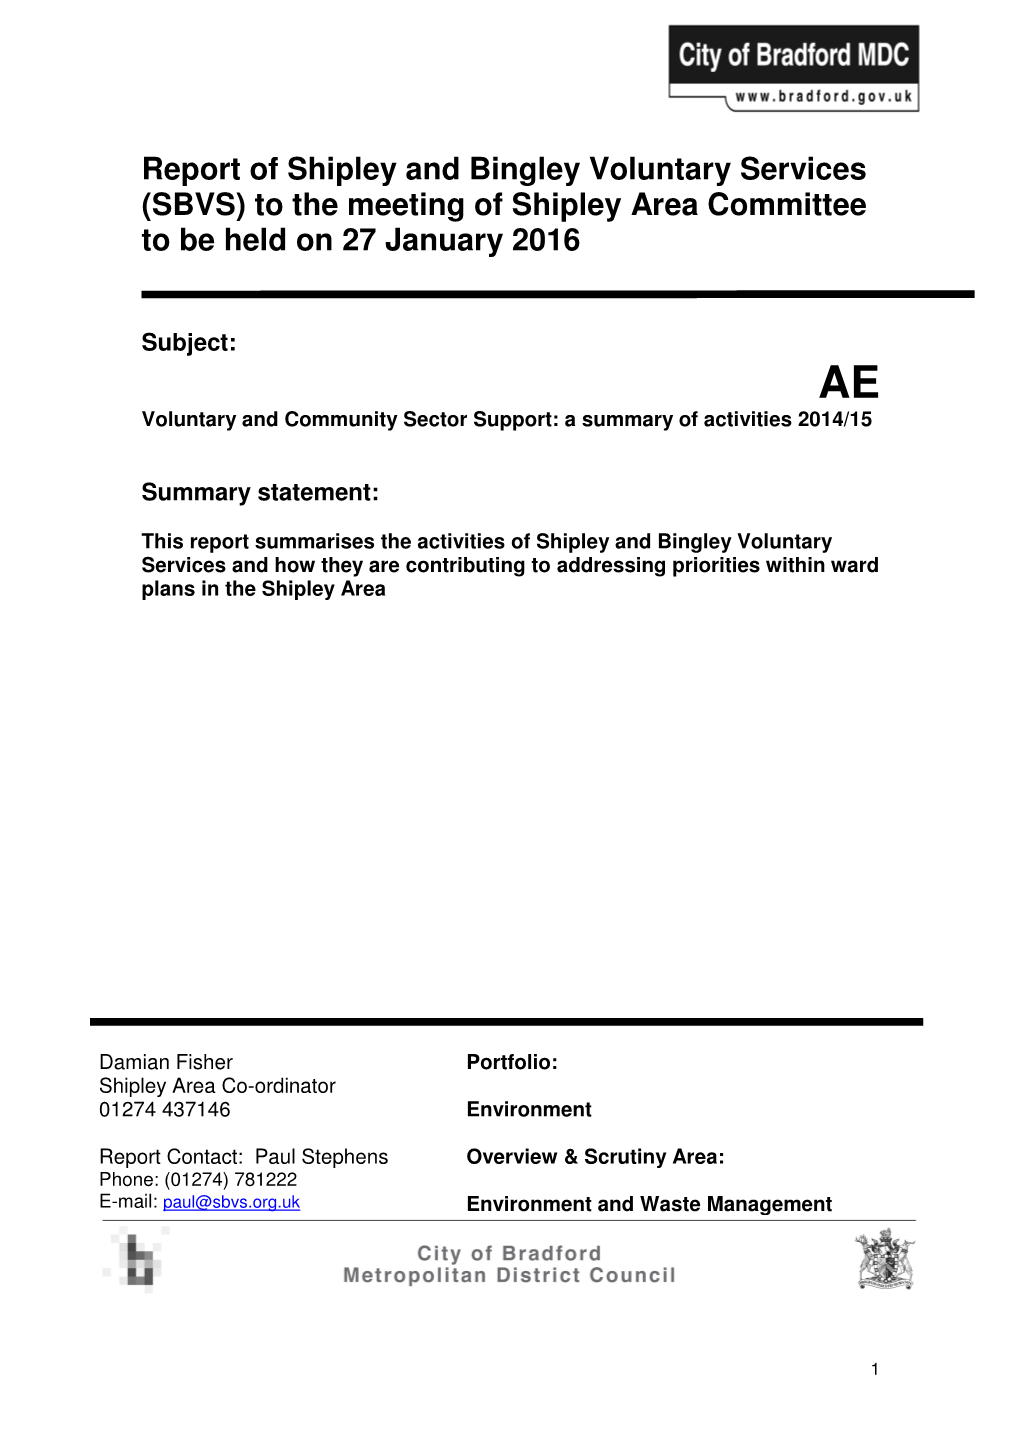 Report of Shipley and Bingley Voluntary Services (SBVS) to the Meeting of Shipley Area Committee to Be Held on 27 January 2016